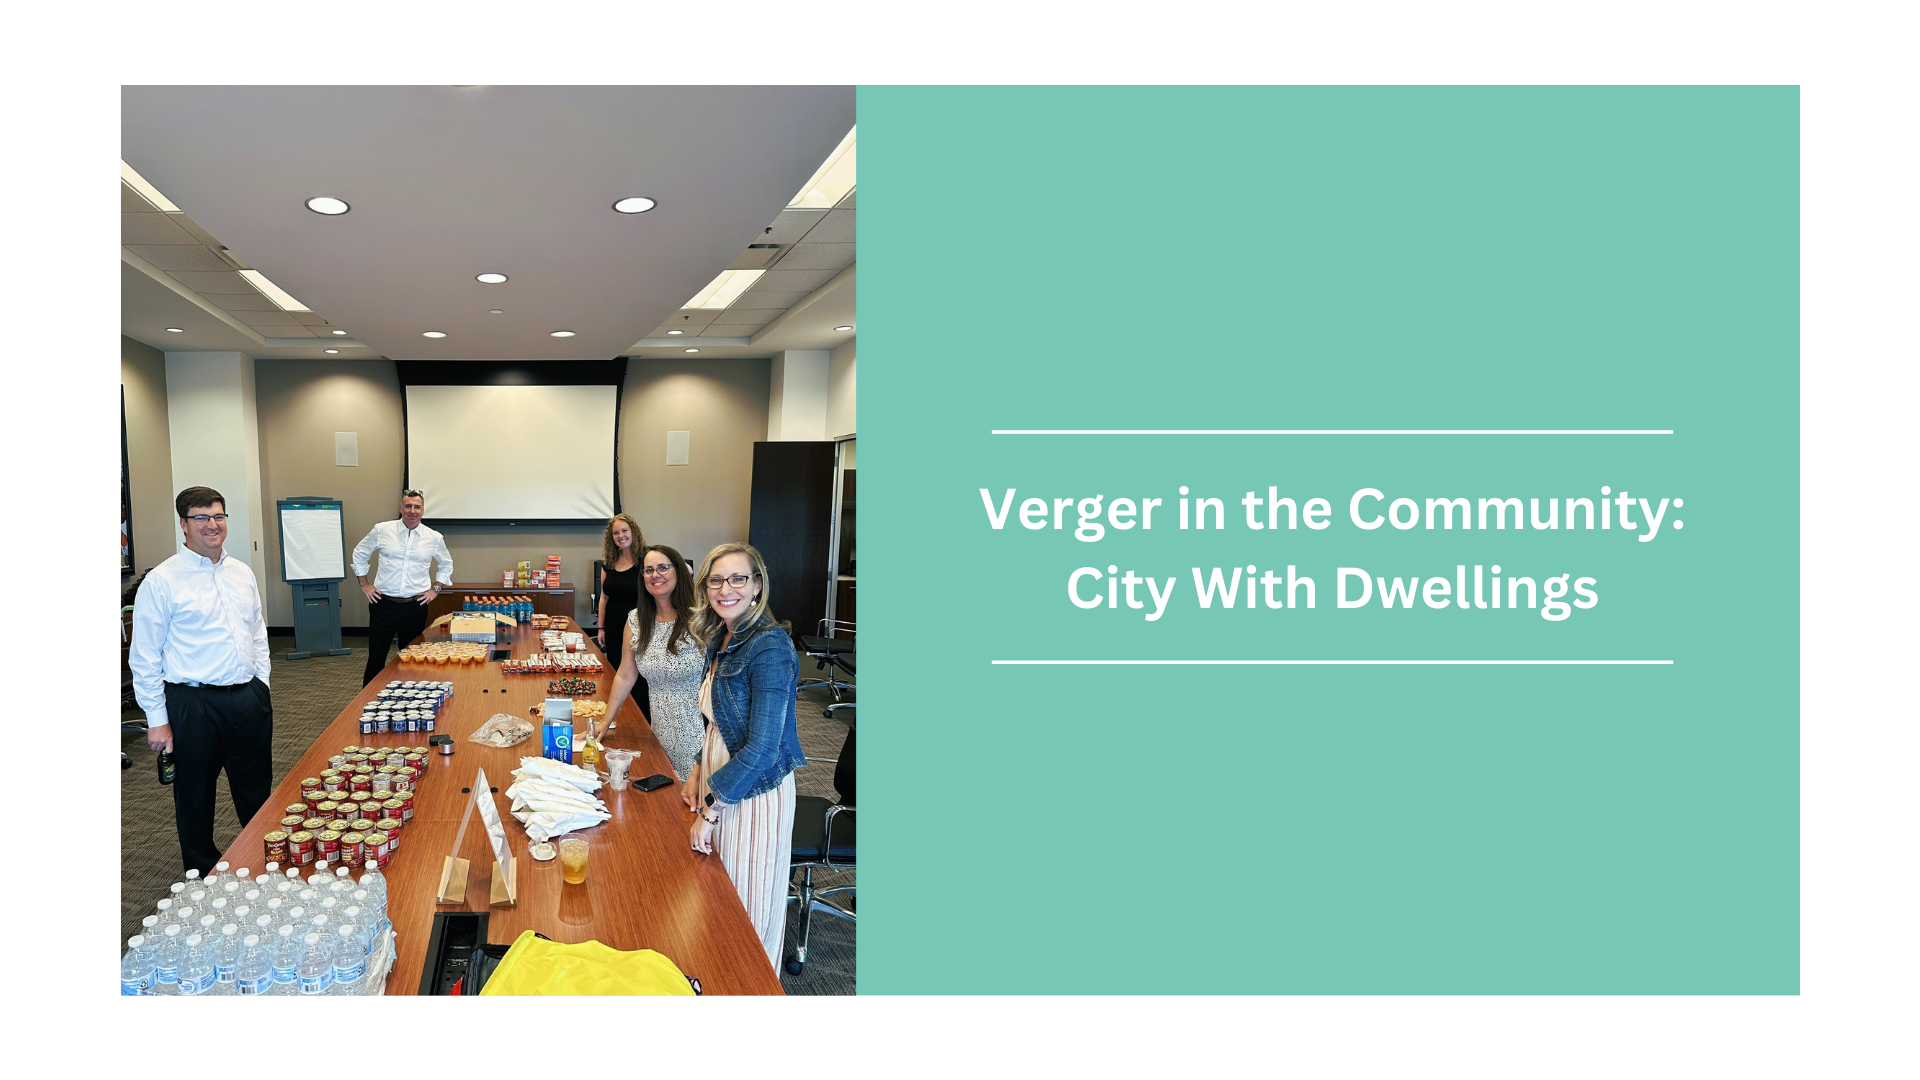 Verger in the Community: City With Dwellings